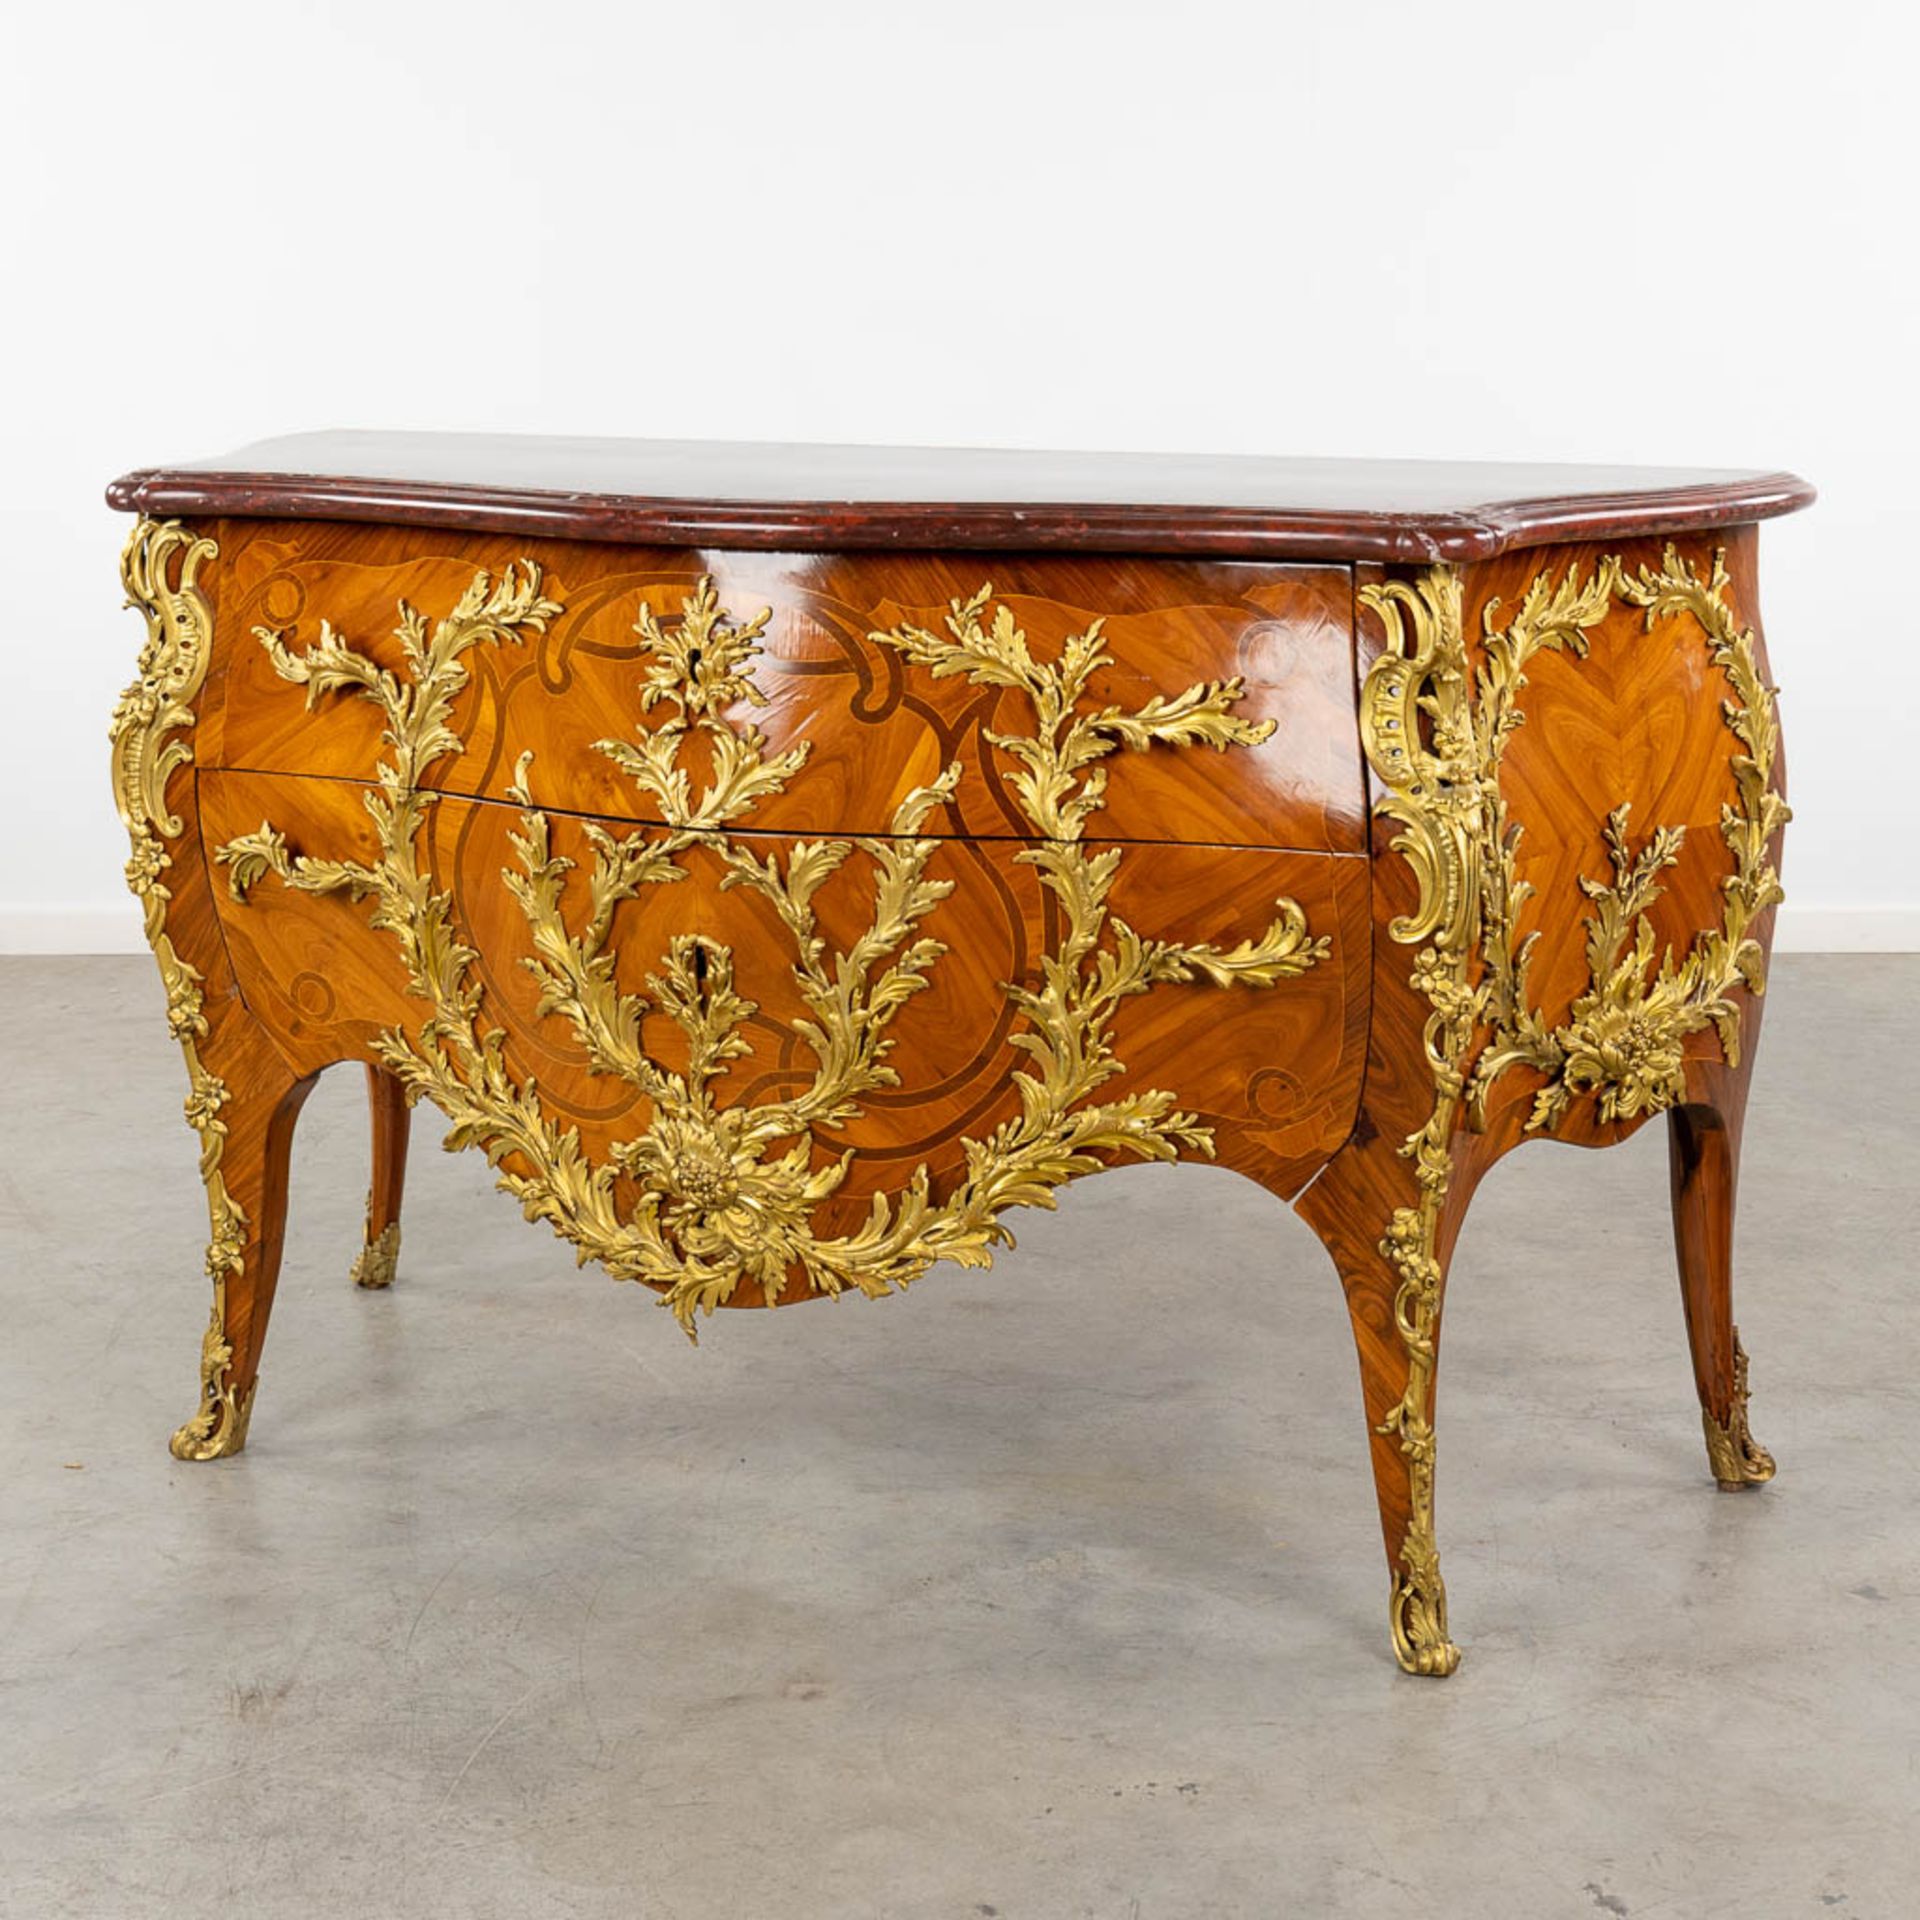 Pierre Roussel (1723-1782) A two-drawer commode, mounted with ormolu bronze. 18th C. (L:63 x W:150 x